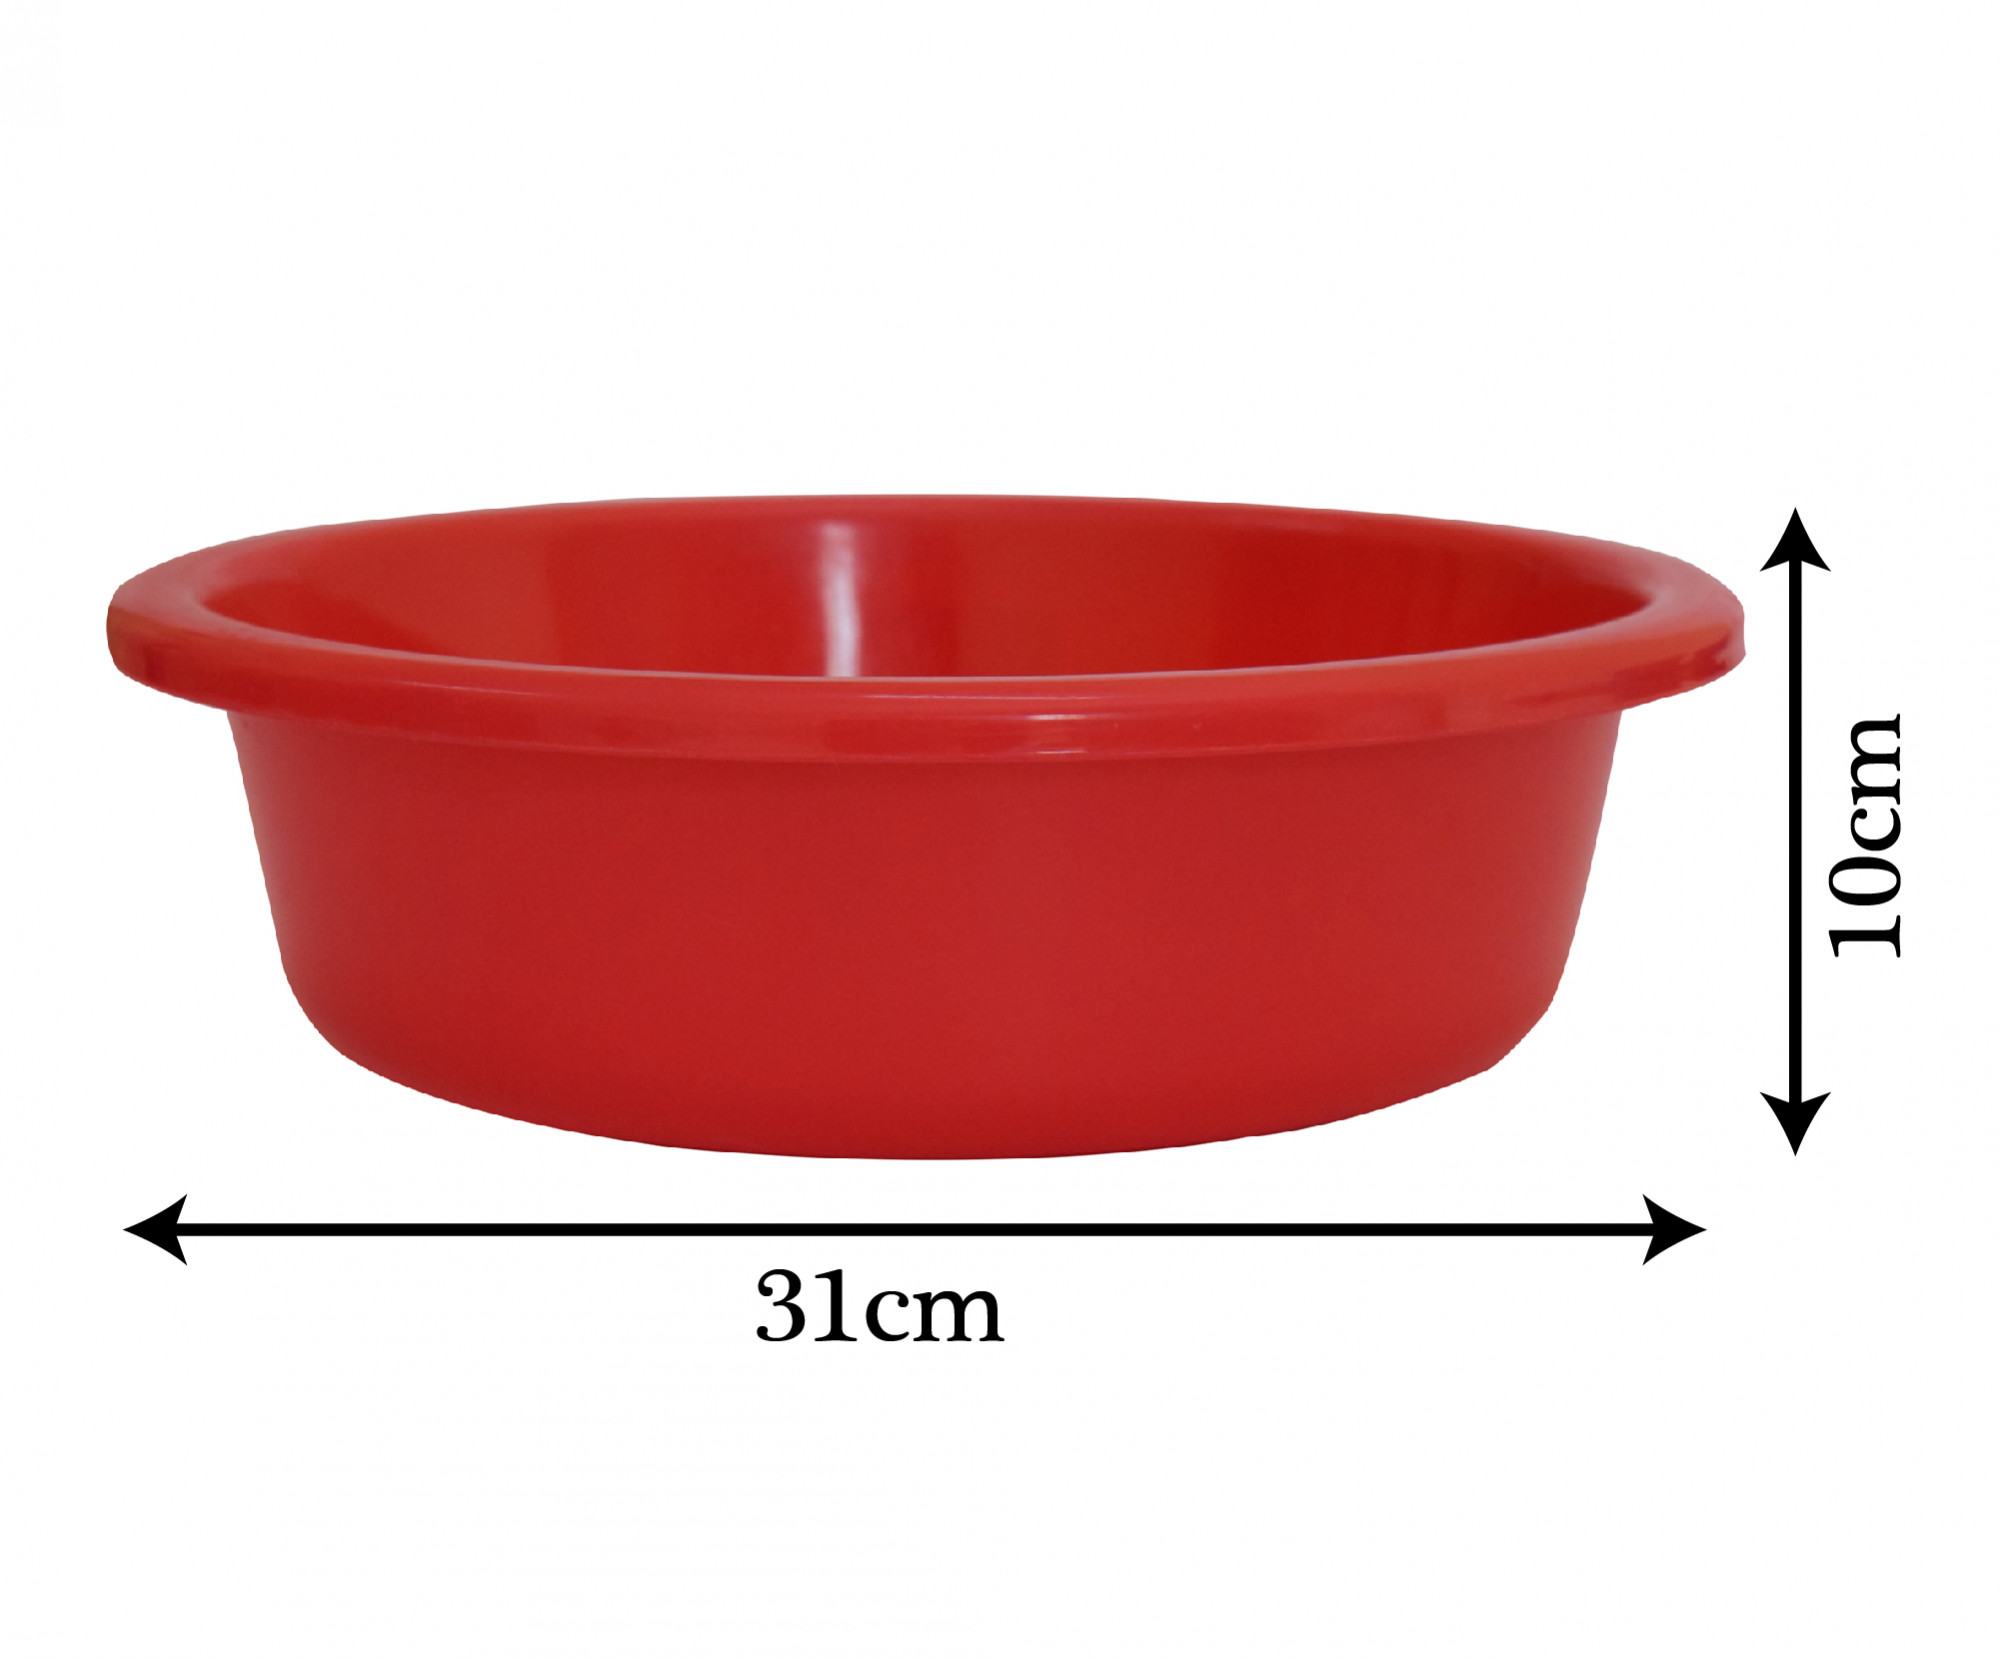 Kuber Industries Multiuses Unbreakable Plastic Knead Dough Basket/Basin Bowl For Home & Kitchen 6 Ltr- Pack of 2 (Blue & Red)